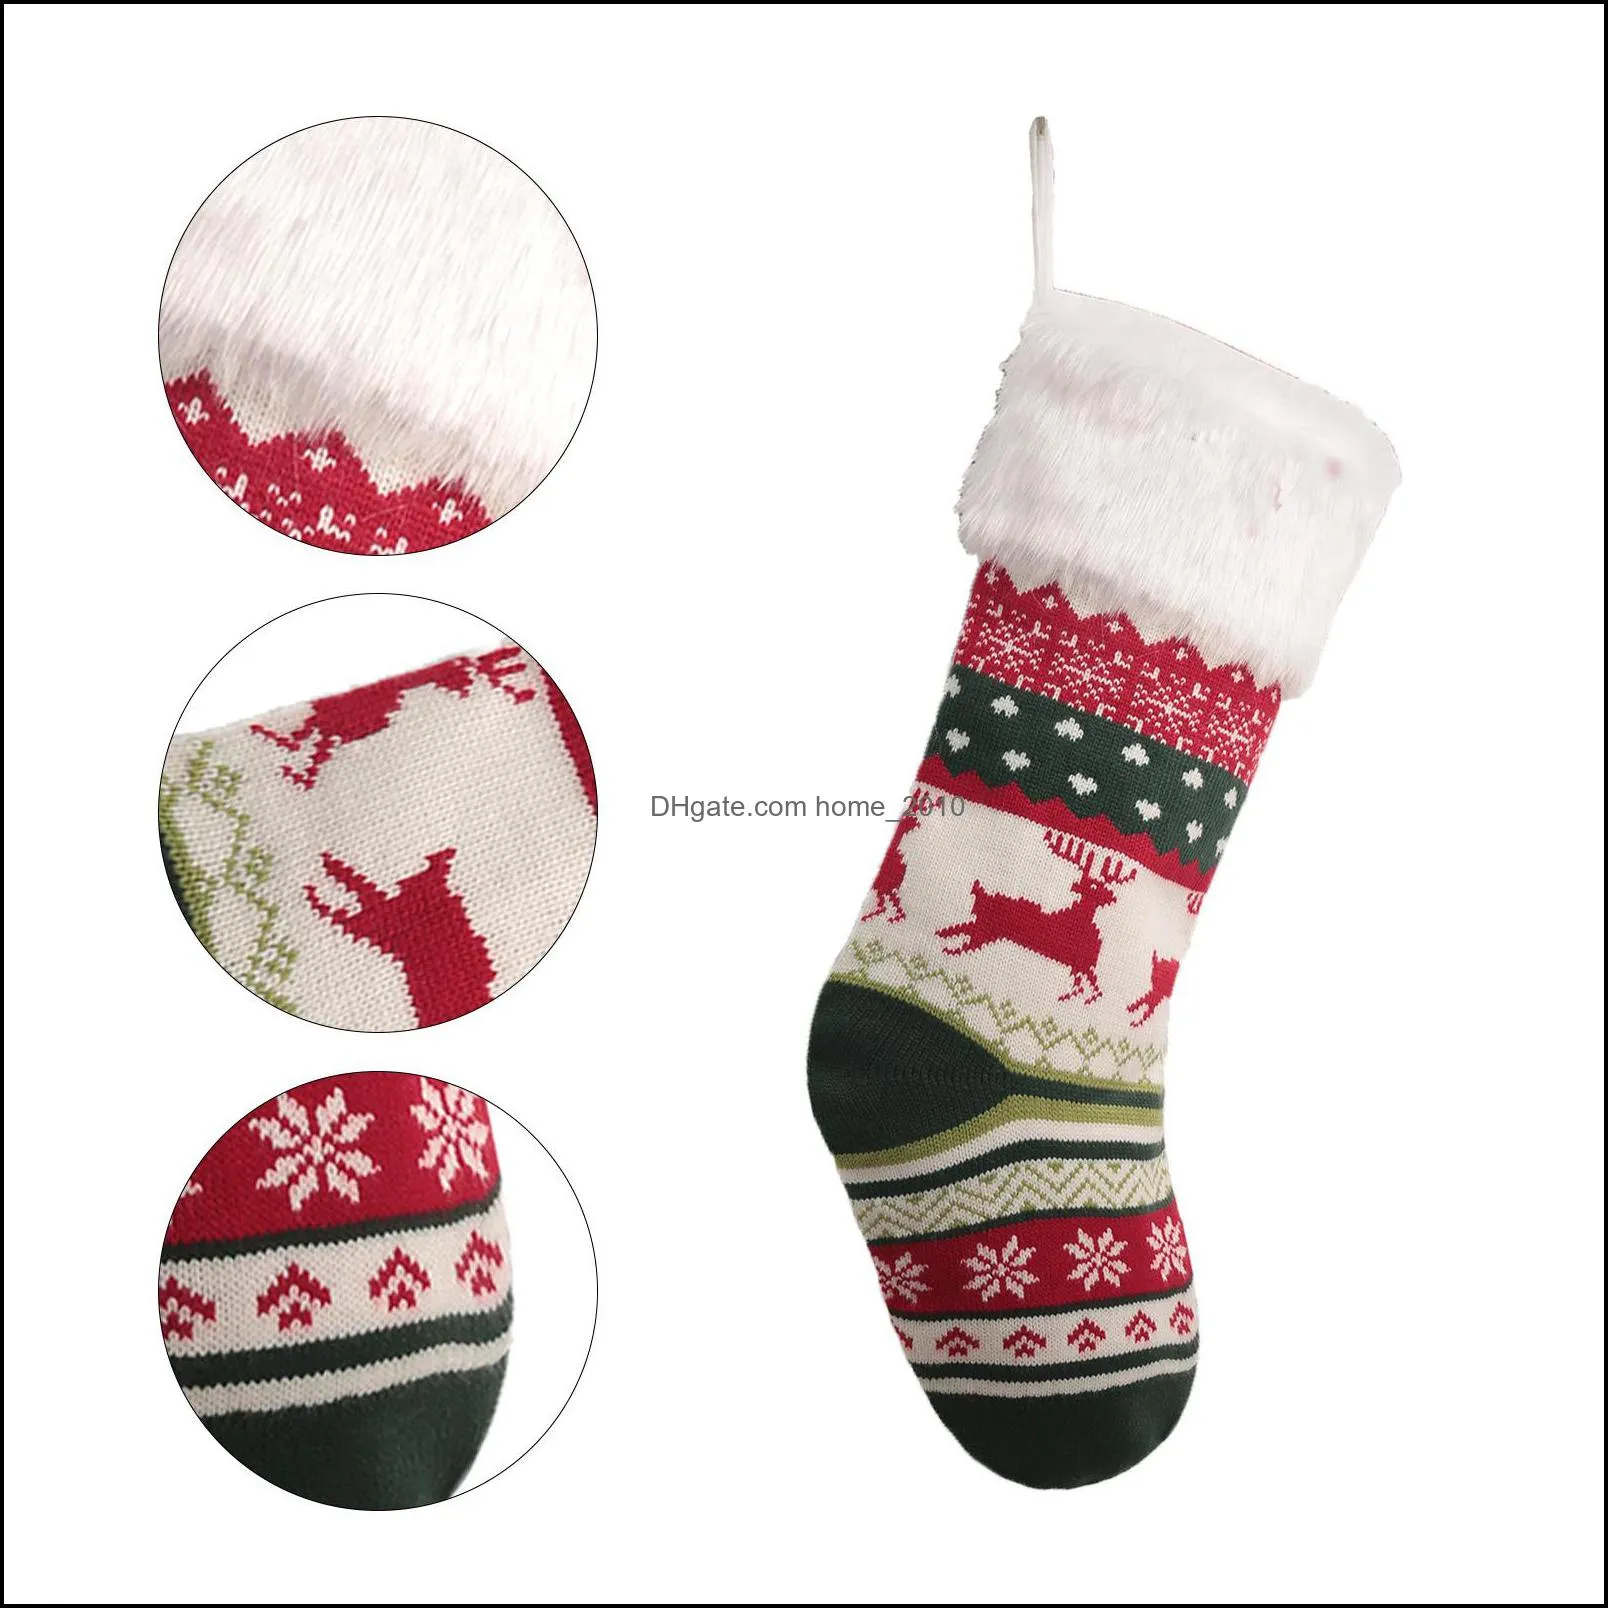 christmas stocking xmas tree hanging decoration ornaments fireplace knitted socks candy gift bag festival decorations yfax3077